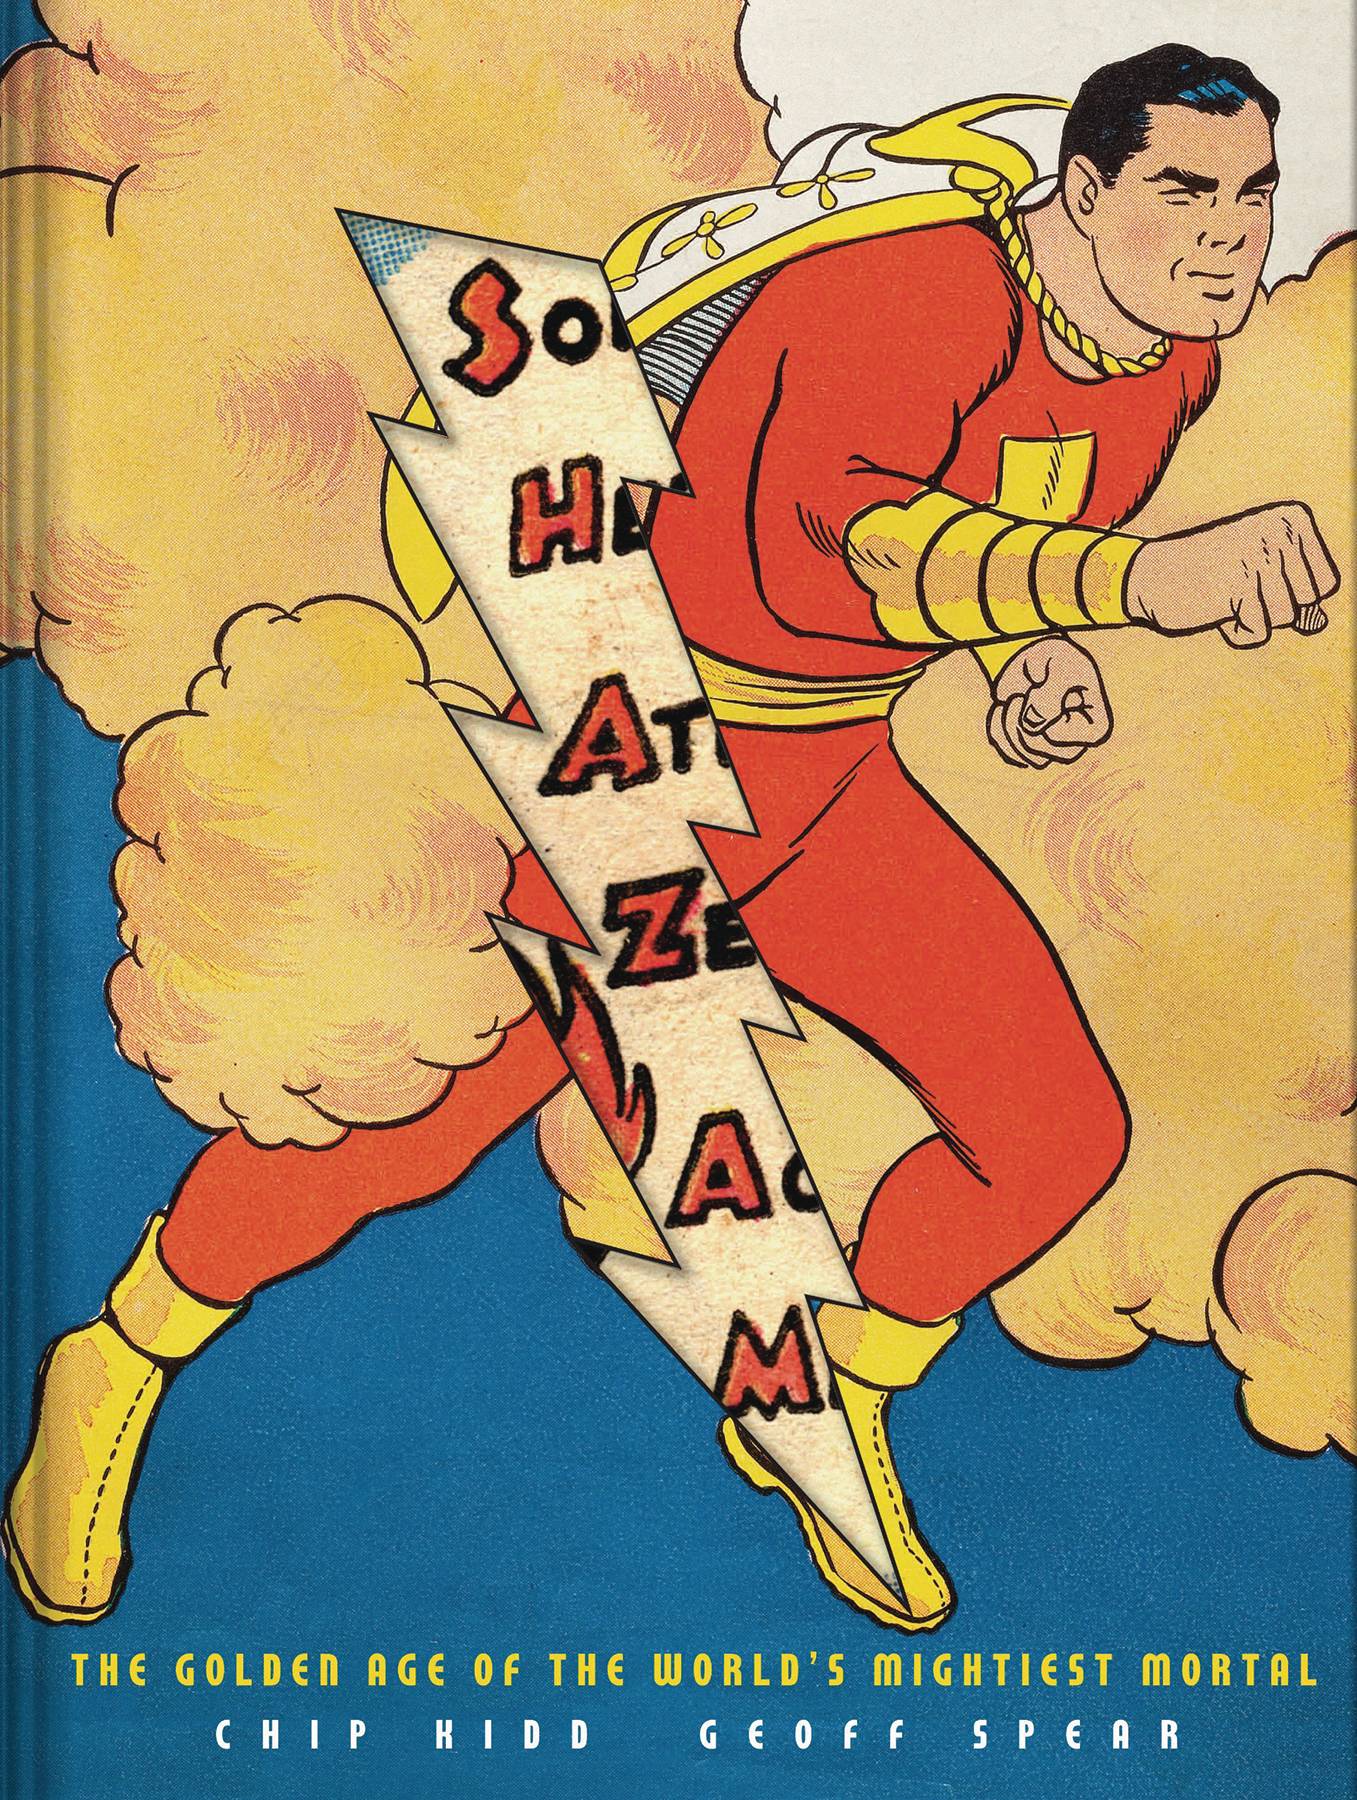 Shazam Golden Age of Worlds Mightest Mortal Soft Cover